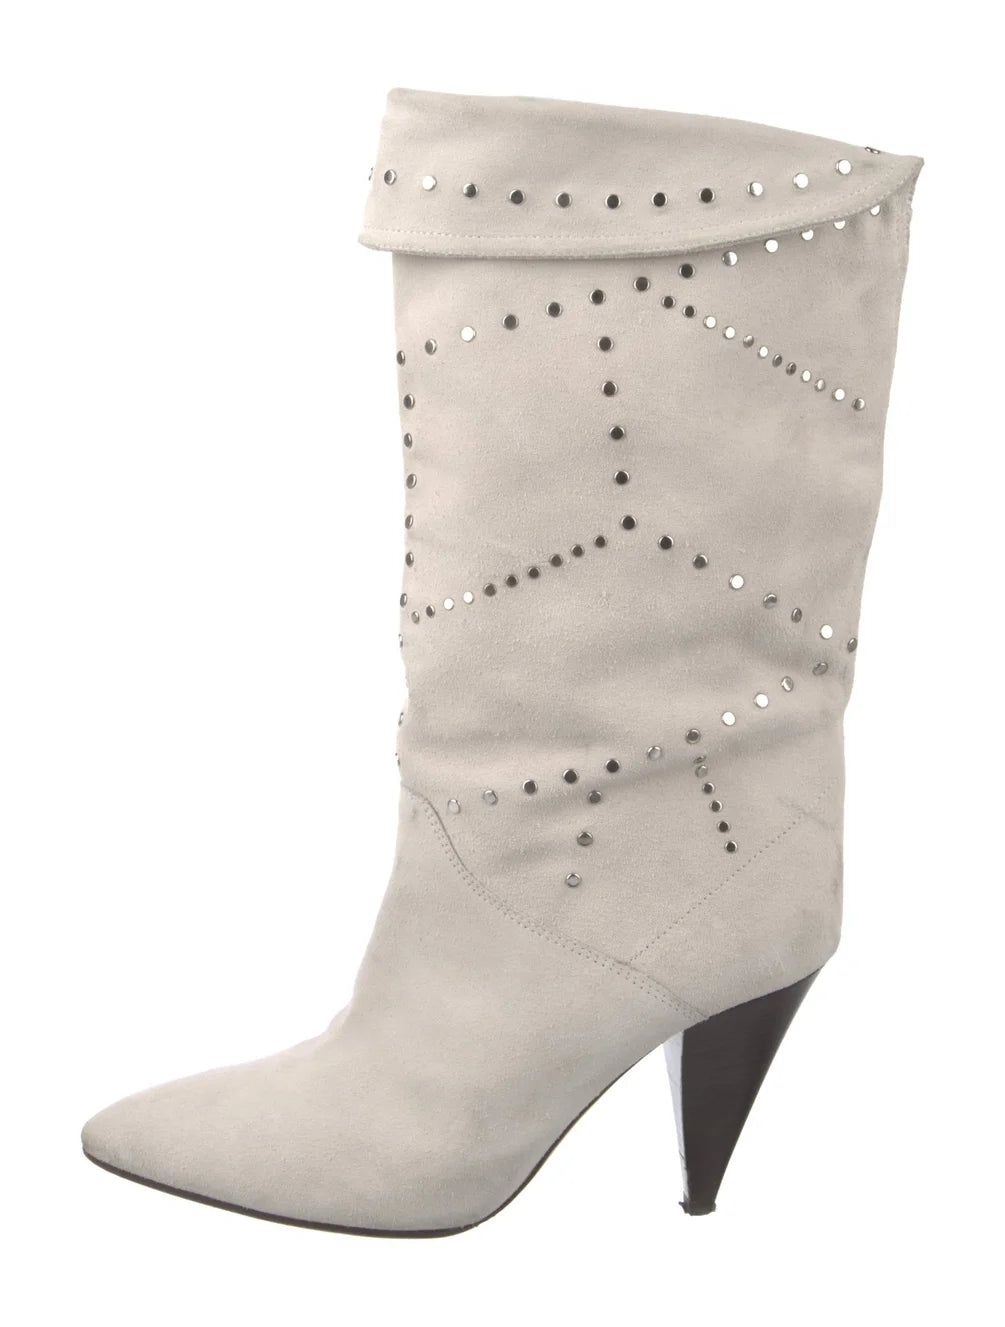 Isabel Marant
Lestee Perforated Leather Boots, SIZE 40